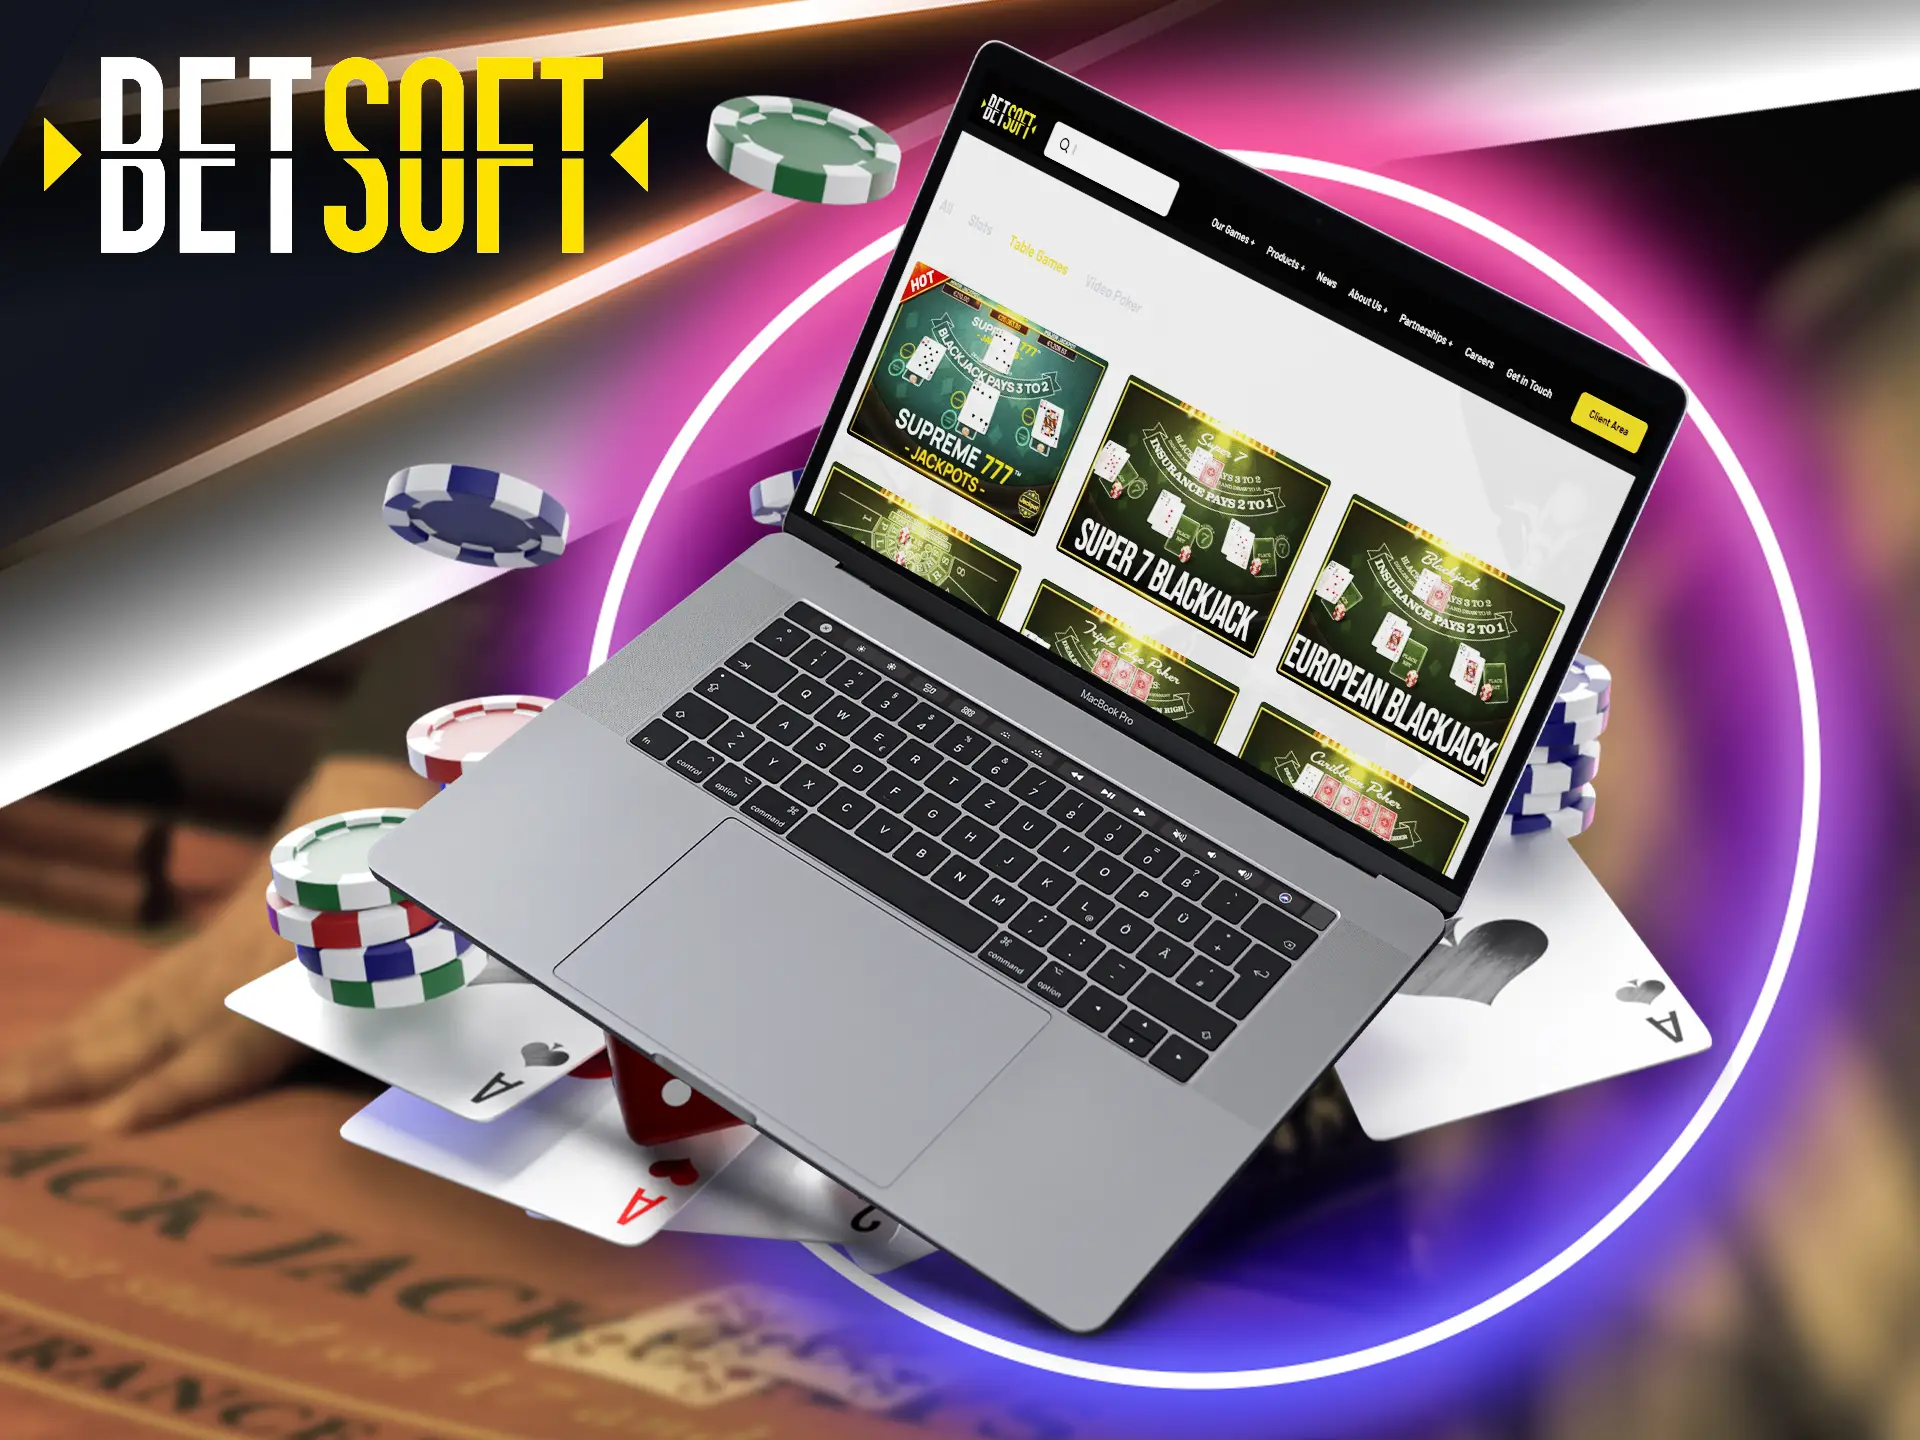 You will have a good time playing a board game from the provider Betsoft.